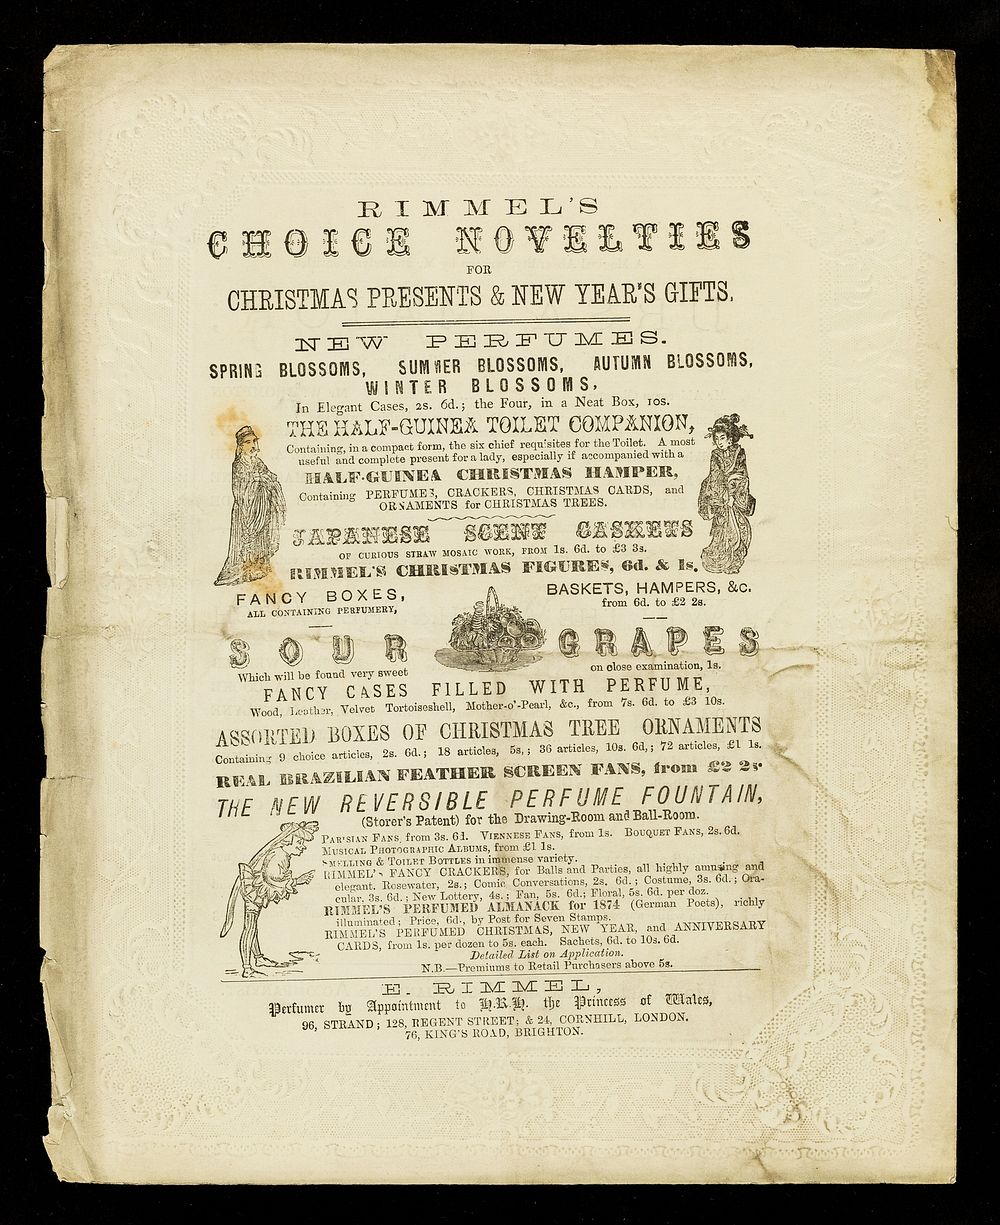 [Theatre programme for performances at the Egyptian Hall, Piccadilly, London by Maskelyne & Cooke, the Royal illusionists…